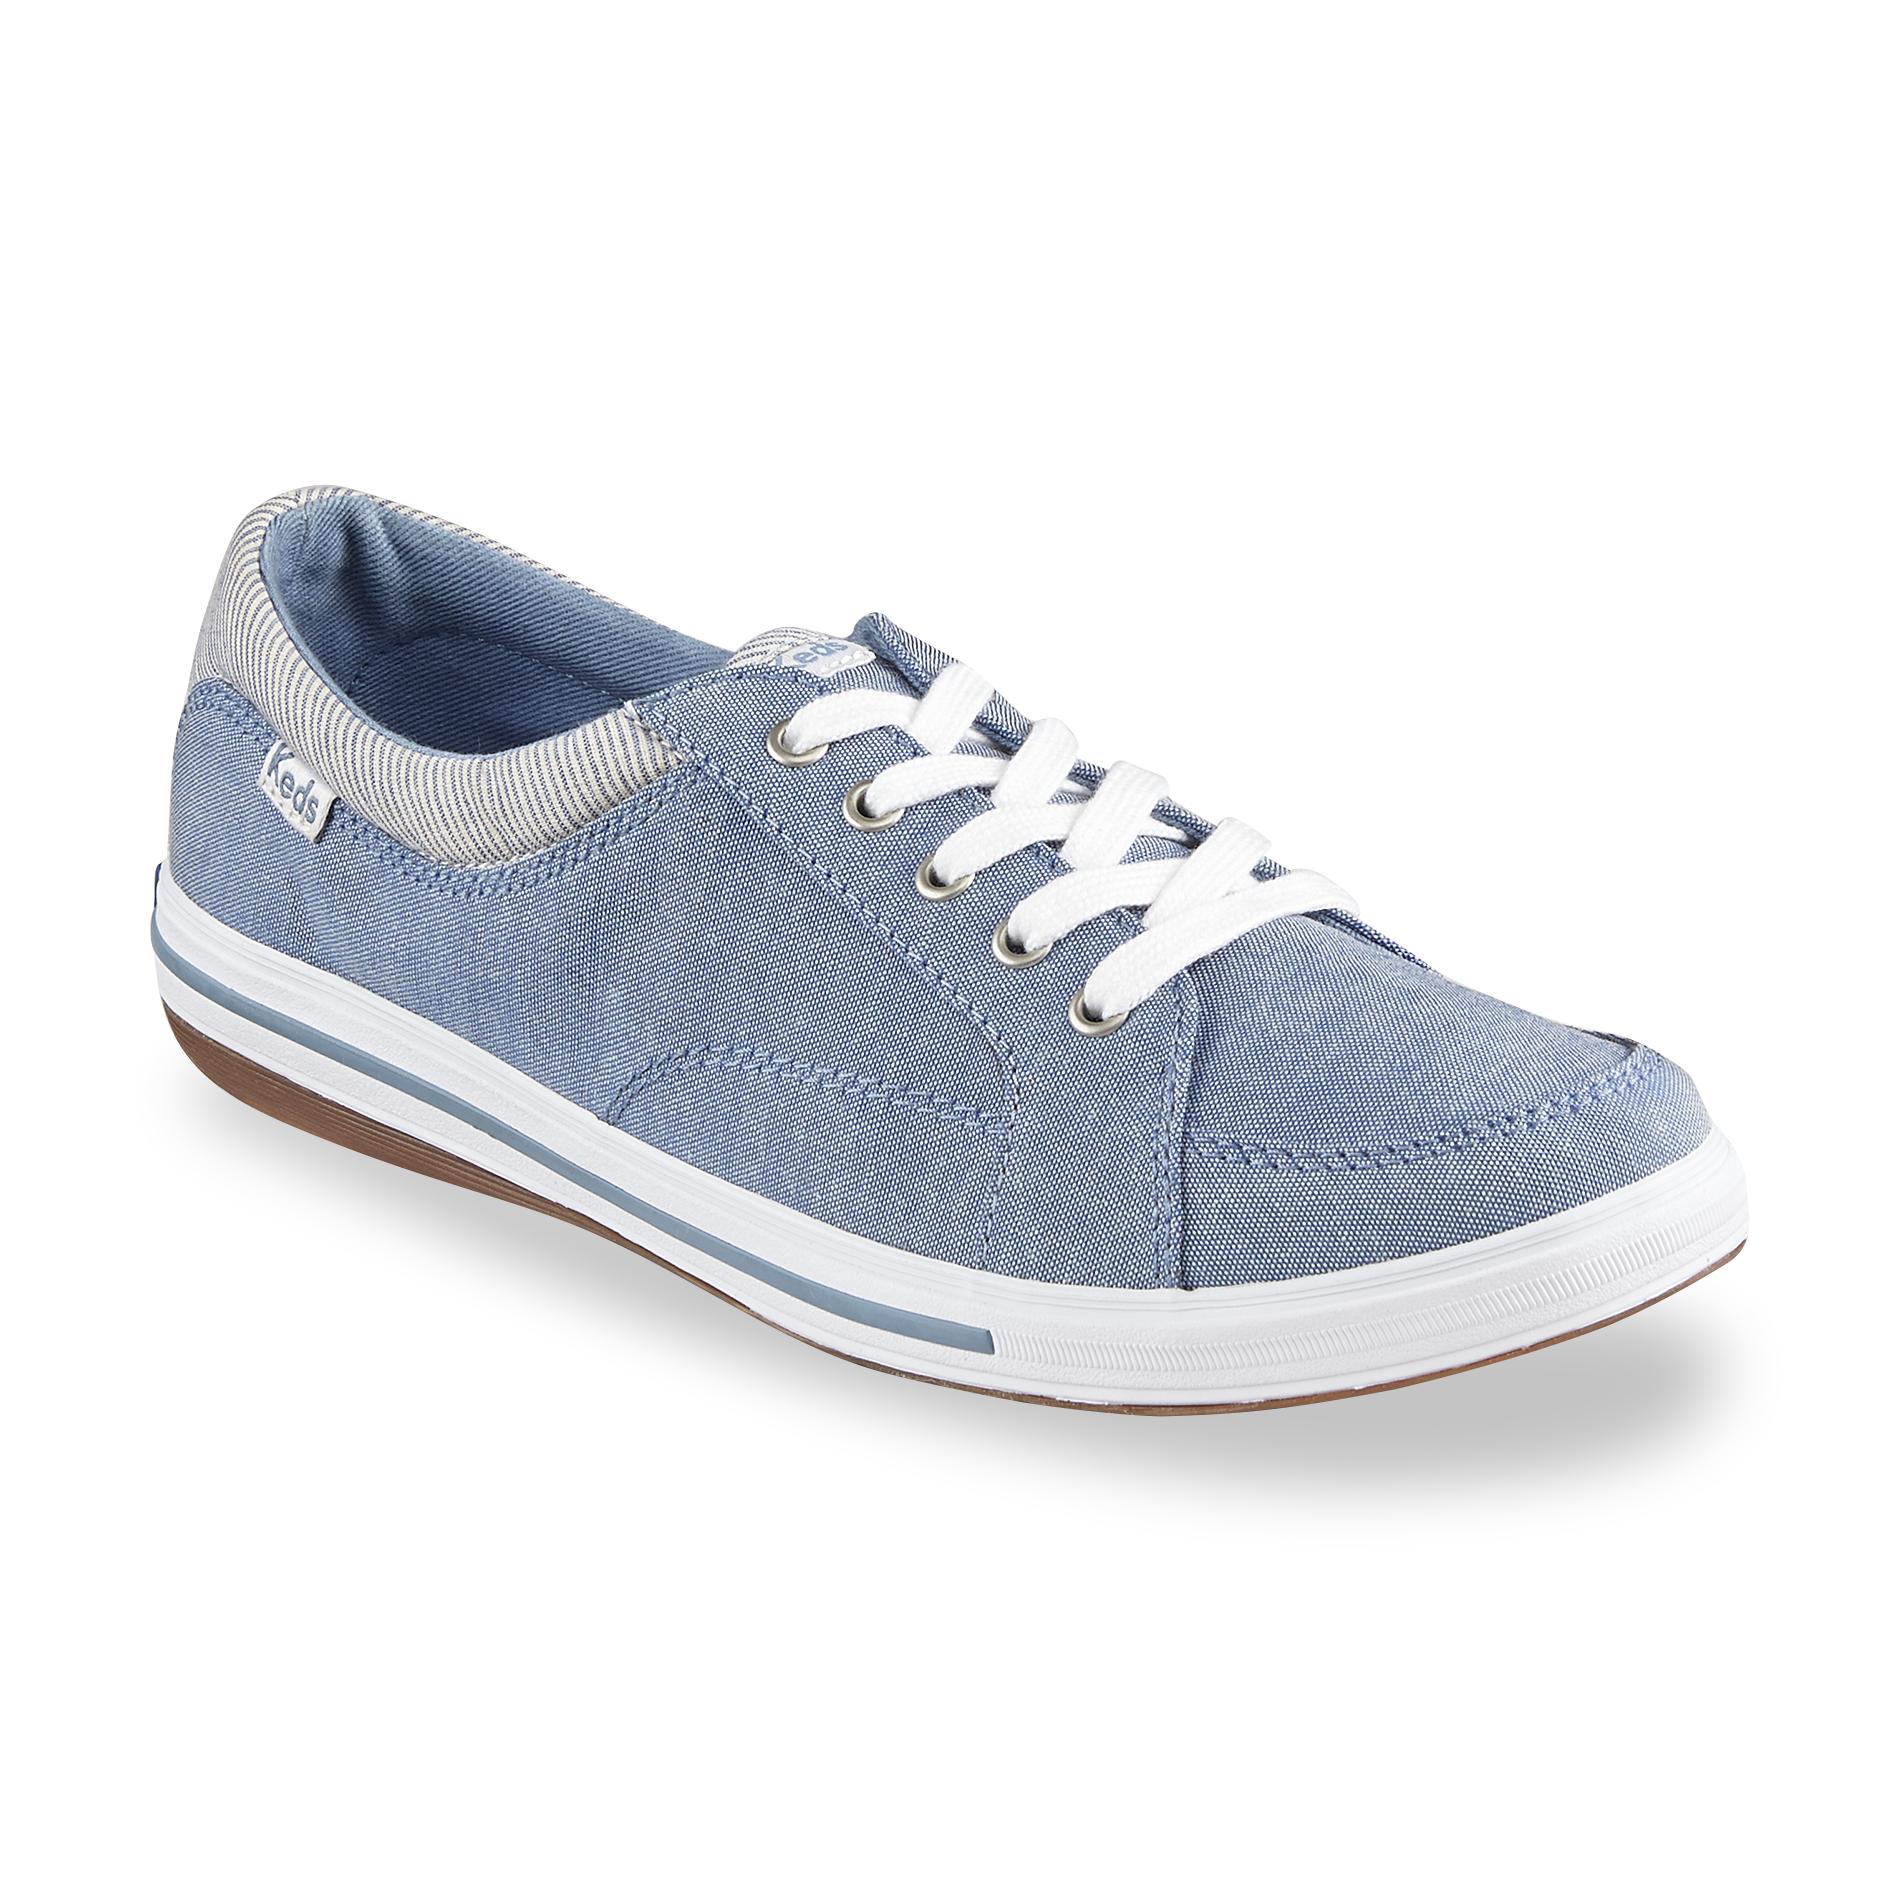 Keds Women's Vollie Blue/White Lace-Up Sneakers | Shop Your Way: Online ...